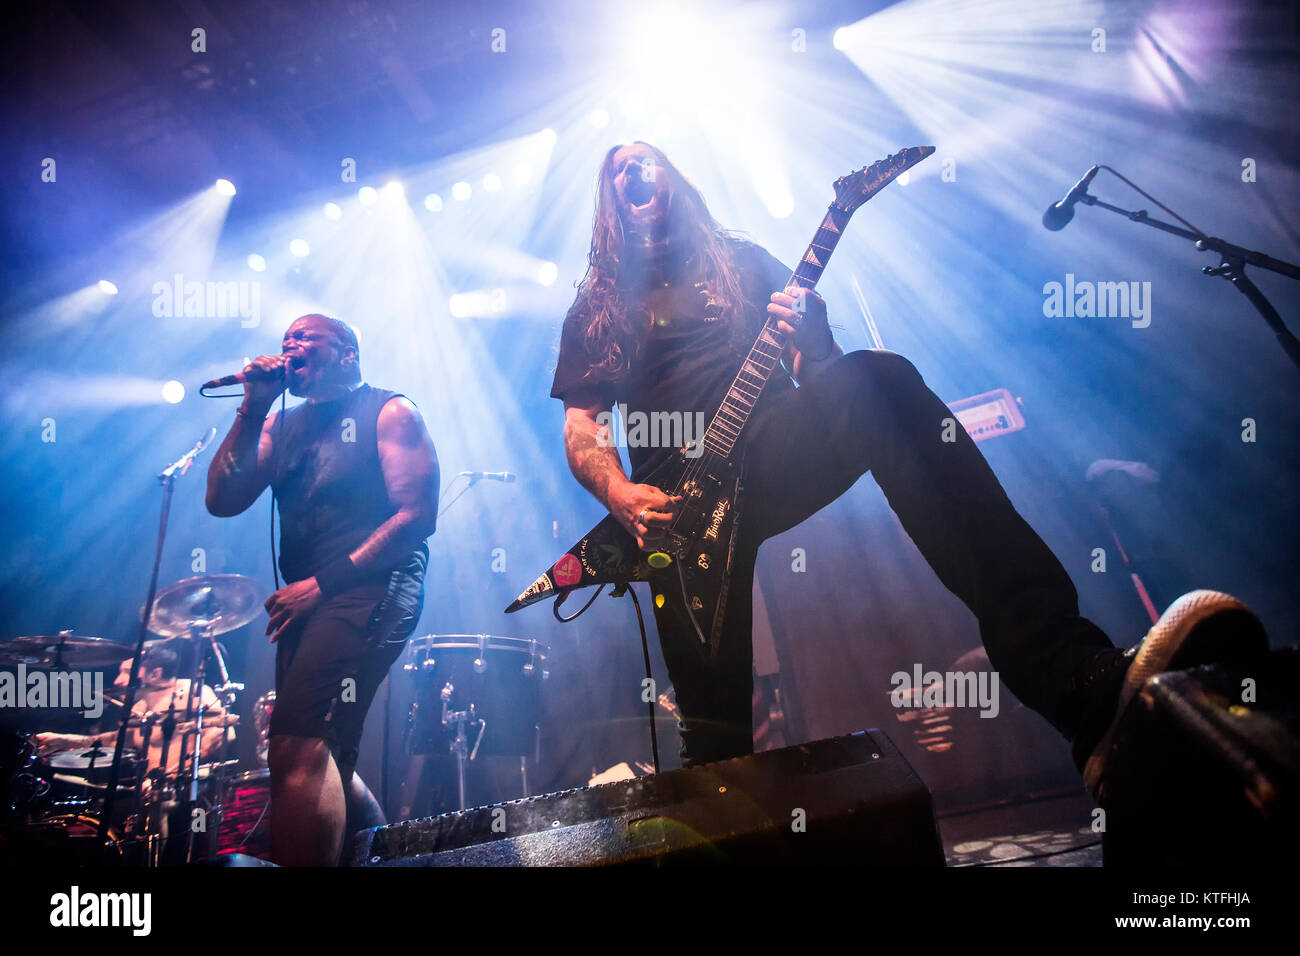 The Brazilian death and thrash metal band Sepultura performs a live concert at Rockefeller in Oslo. Here vocalist Derrick Green is seen live on stage with guitarist Andreas Kisser. Denmark, 07/02 2017. Stock Photo